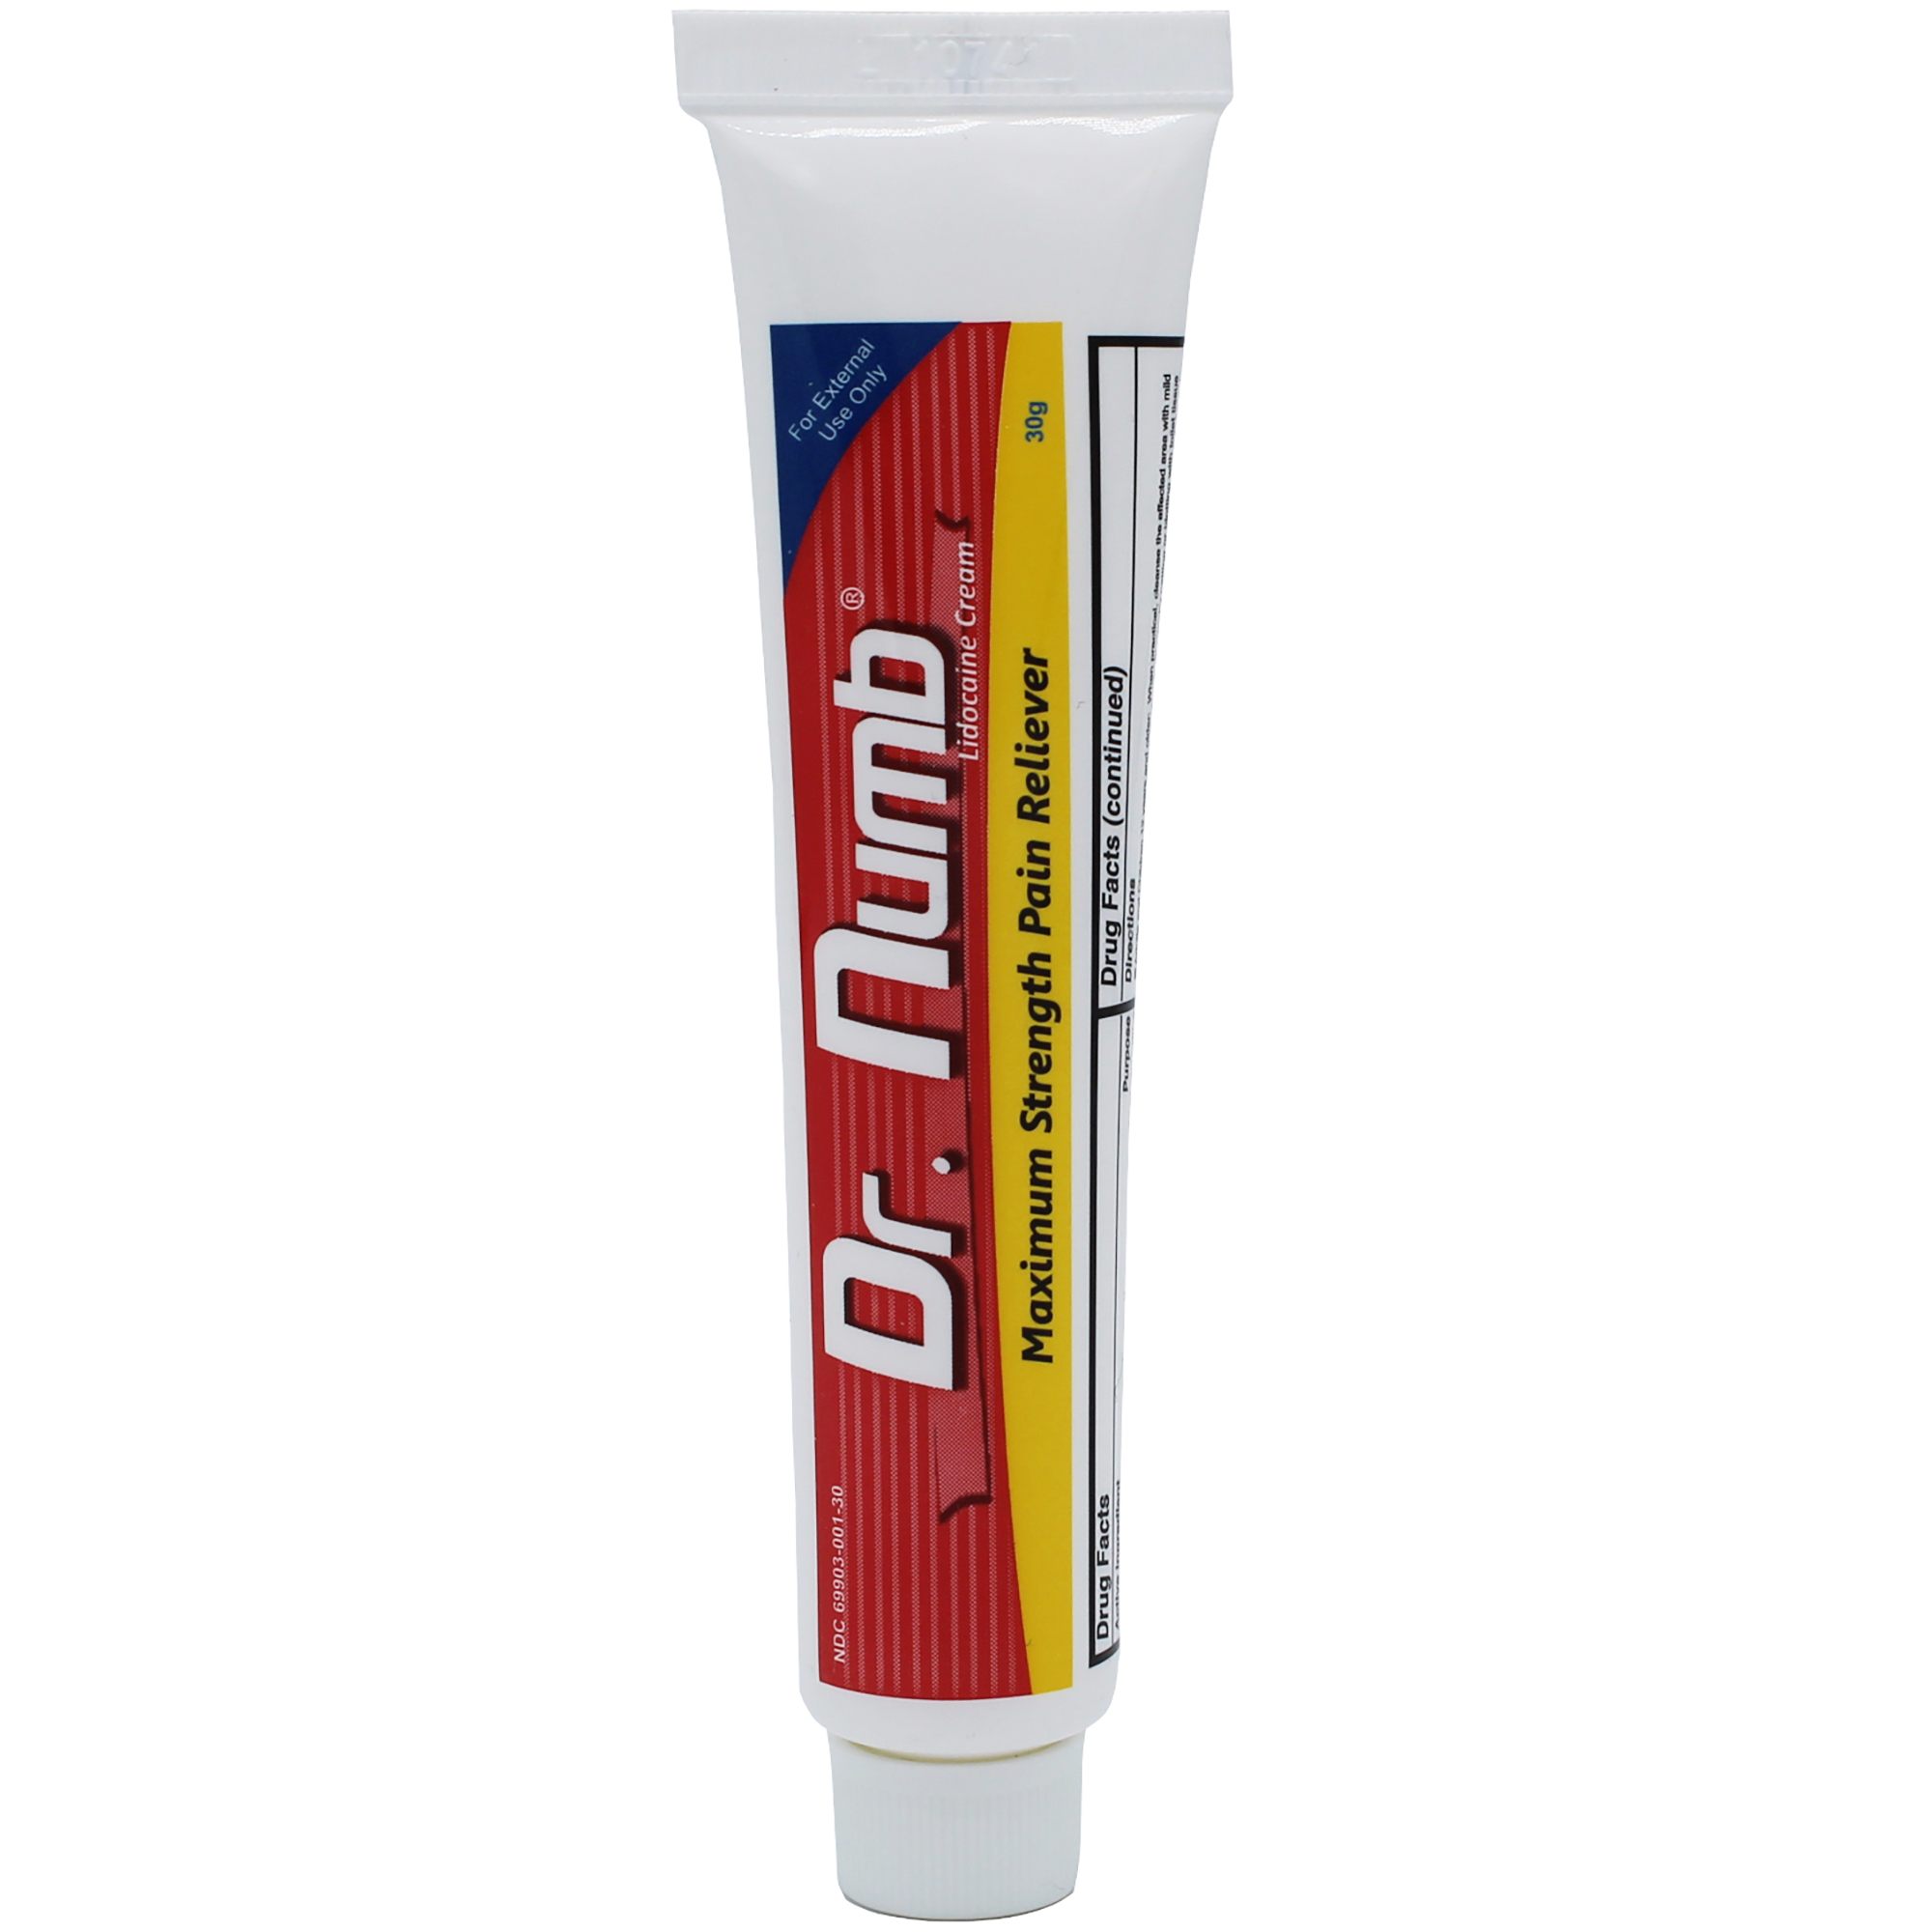 Dr. Numb 5% Lidocaine Topical Anesthetic Numbing Cream for Pain Relief, Maximum Strength with Vitamin E for Real Time Relieves of Local Discomfort, Itching, Pain, Soreness or Burning - 30g - image 3 of 5